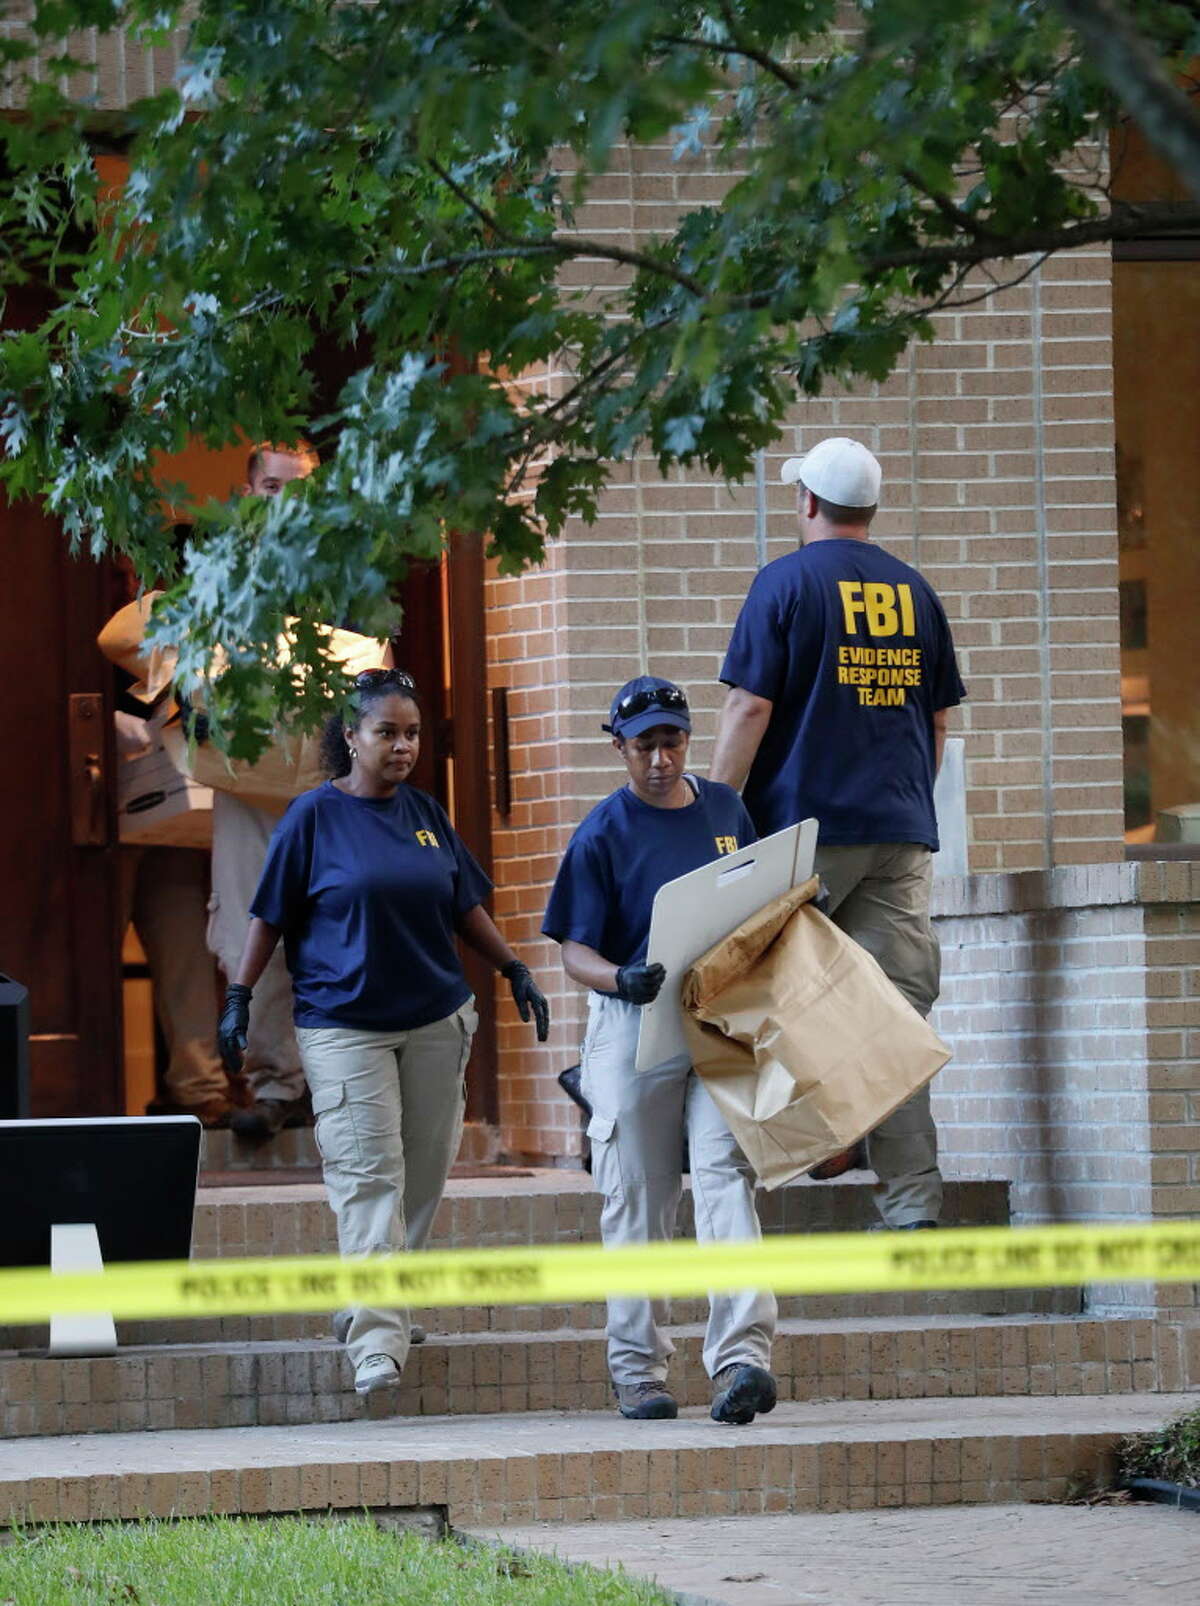 FBI agents take bags of evidence out of a house at 2025 Albans, Monday, Aug. 21, 2017, in Houston. Earlier in the day, the ATF, FBI and Houston Police conducted a controlled explosion at the house next door at 2021 Albans.